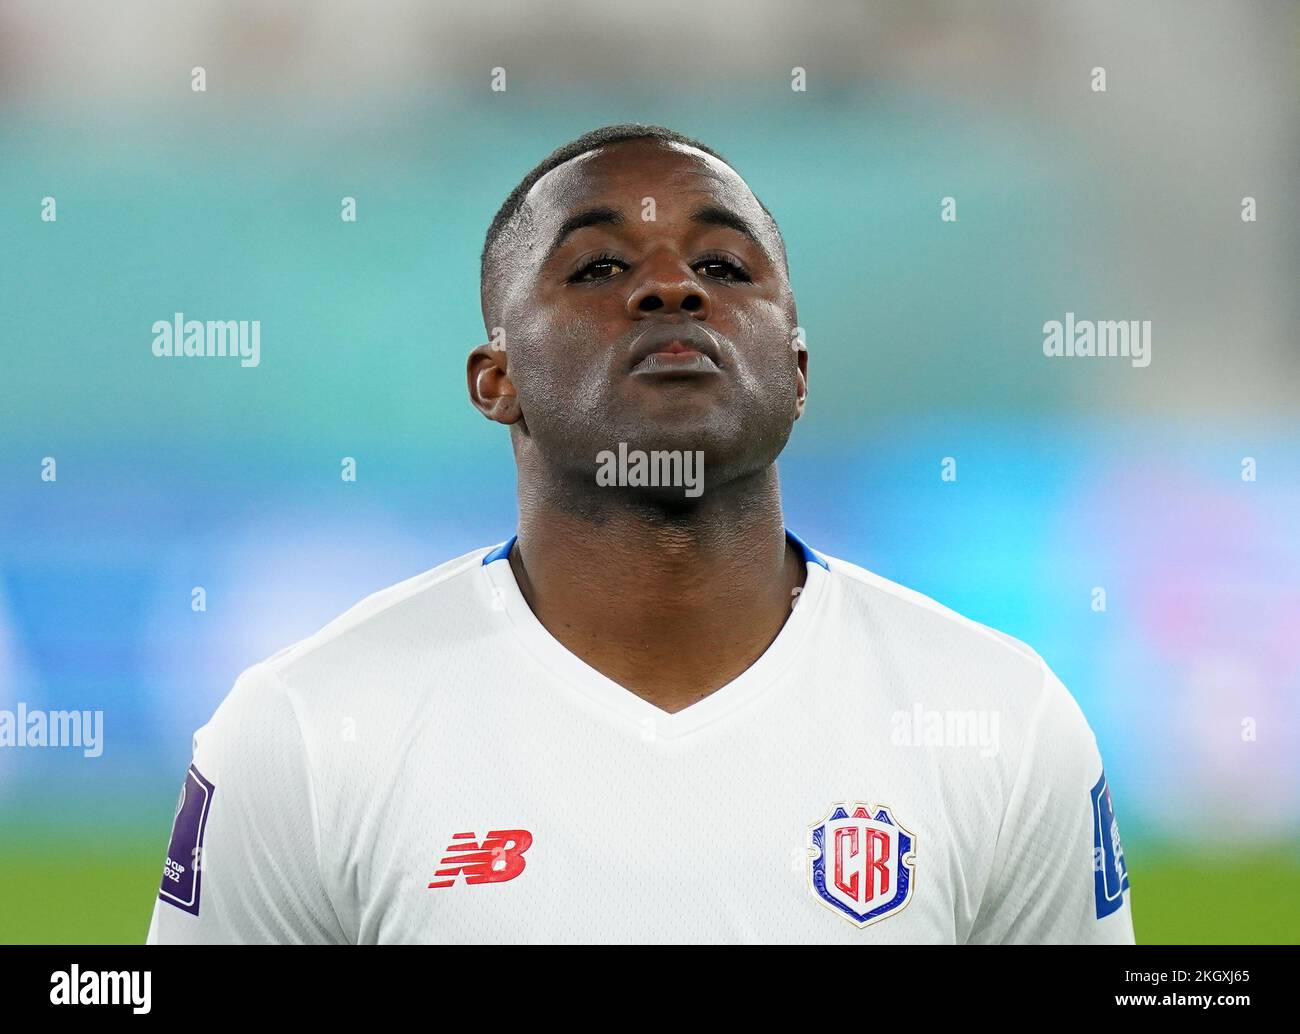 Costa Rica's Joel Campbell during the FIFA World Cup Group E match at the Al Thumama Stadium, Doha. Picture date: Wednesday November 23, 2022. Stock Photo